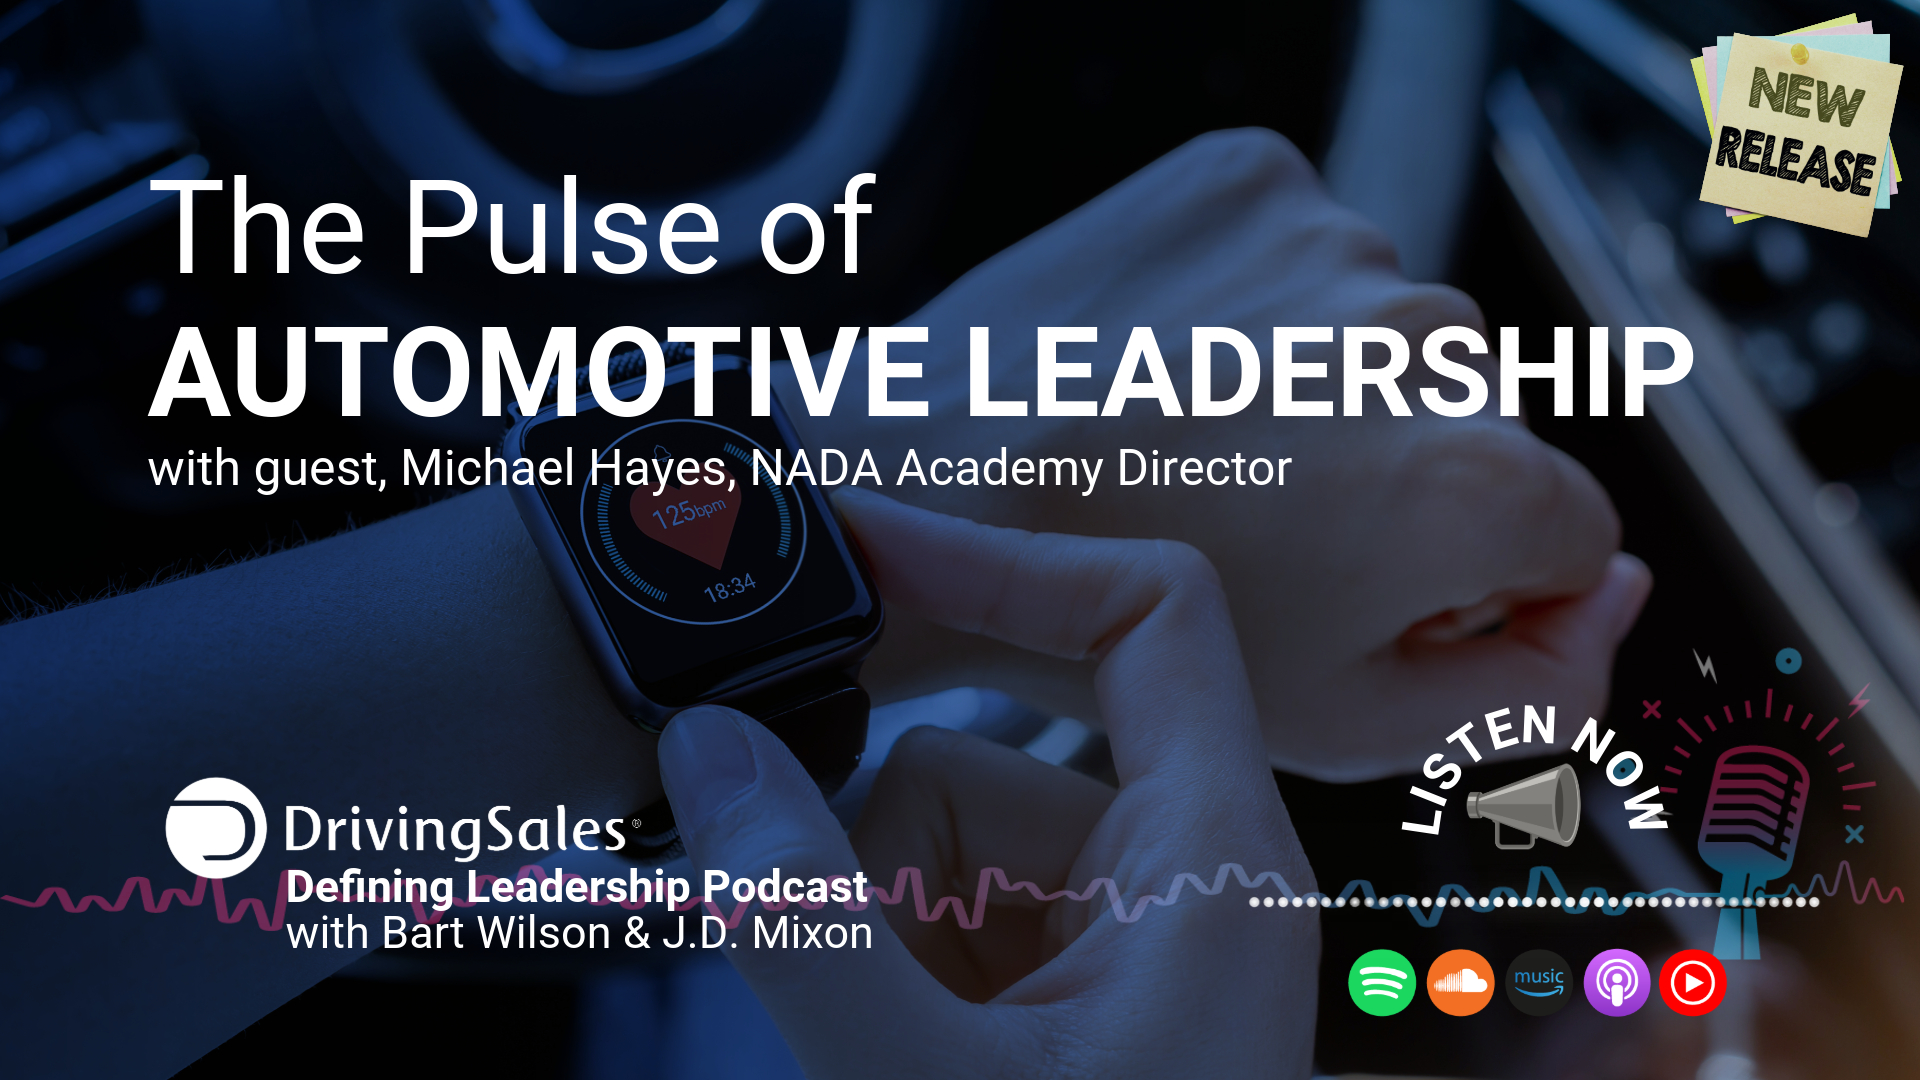 The image is a promotional graphic for a podcast titled "The Pulse of Automotive Leadership" featuring guest Michael Hayes, the NADA Academy Director. The visual shows a person's hand adjusting a smartwatch in a car, emphasizing technology and automotive themes. The podcast's name, "DrivingSales Defining Leadership Podcast" with hosts Bart Wilson & J.D. Mixon, is prominently displayed along with logos for Spotify, Apple Podcasts, and other platforms, indicating where the podcast can be listened to. The graphic is designed to attract listeners interested in automotive leadership and innovations.